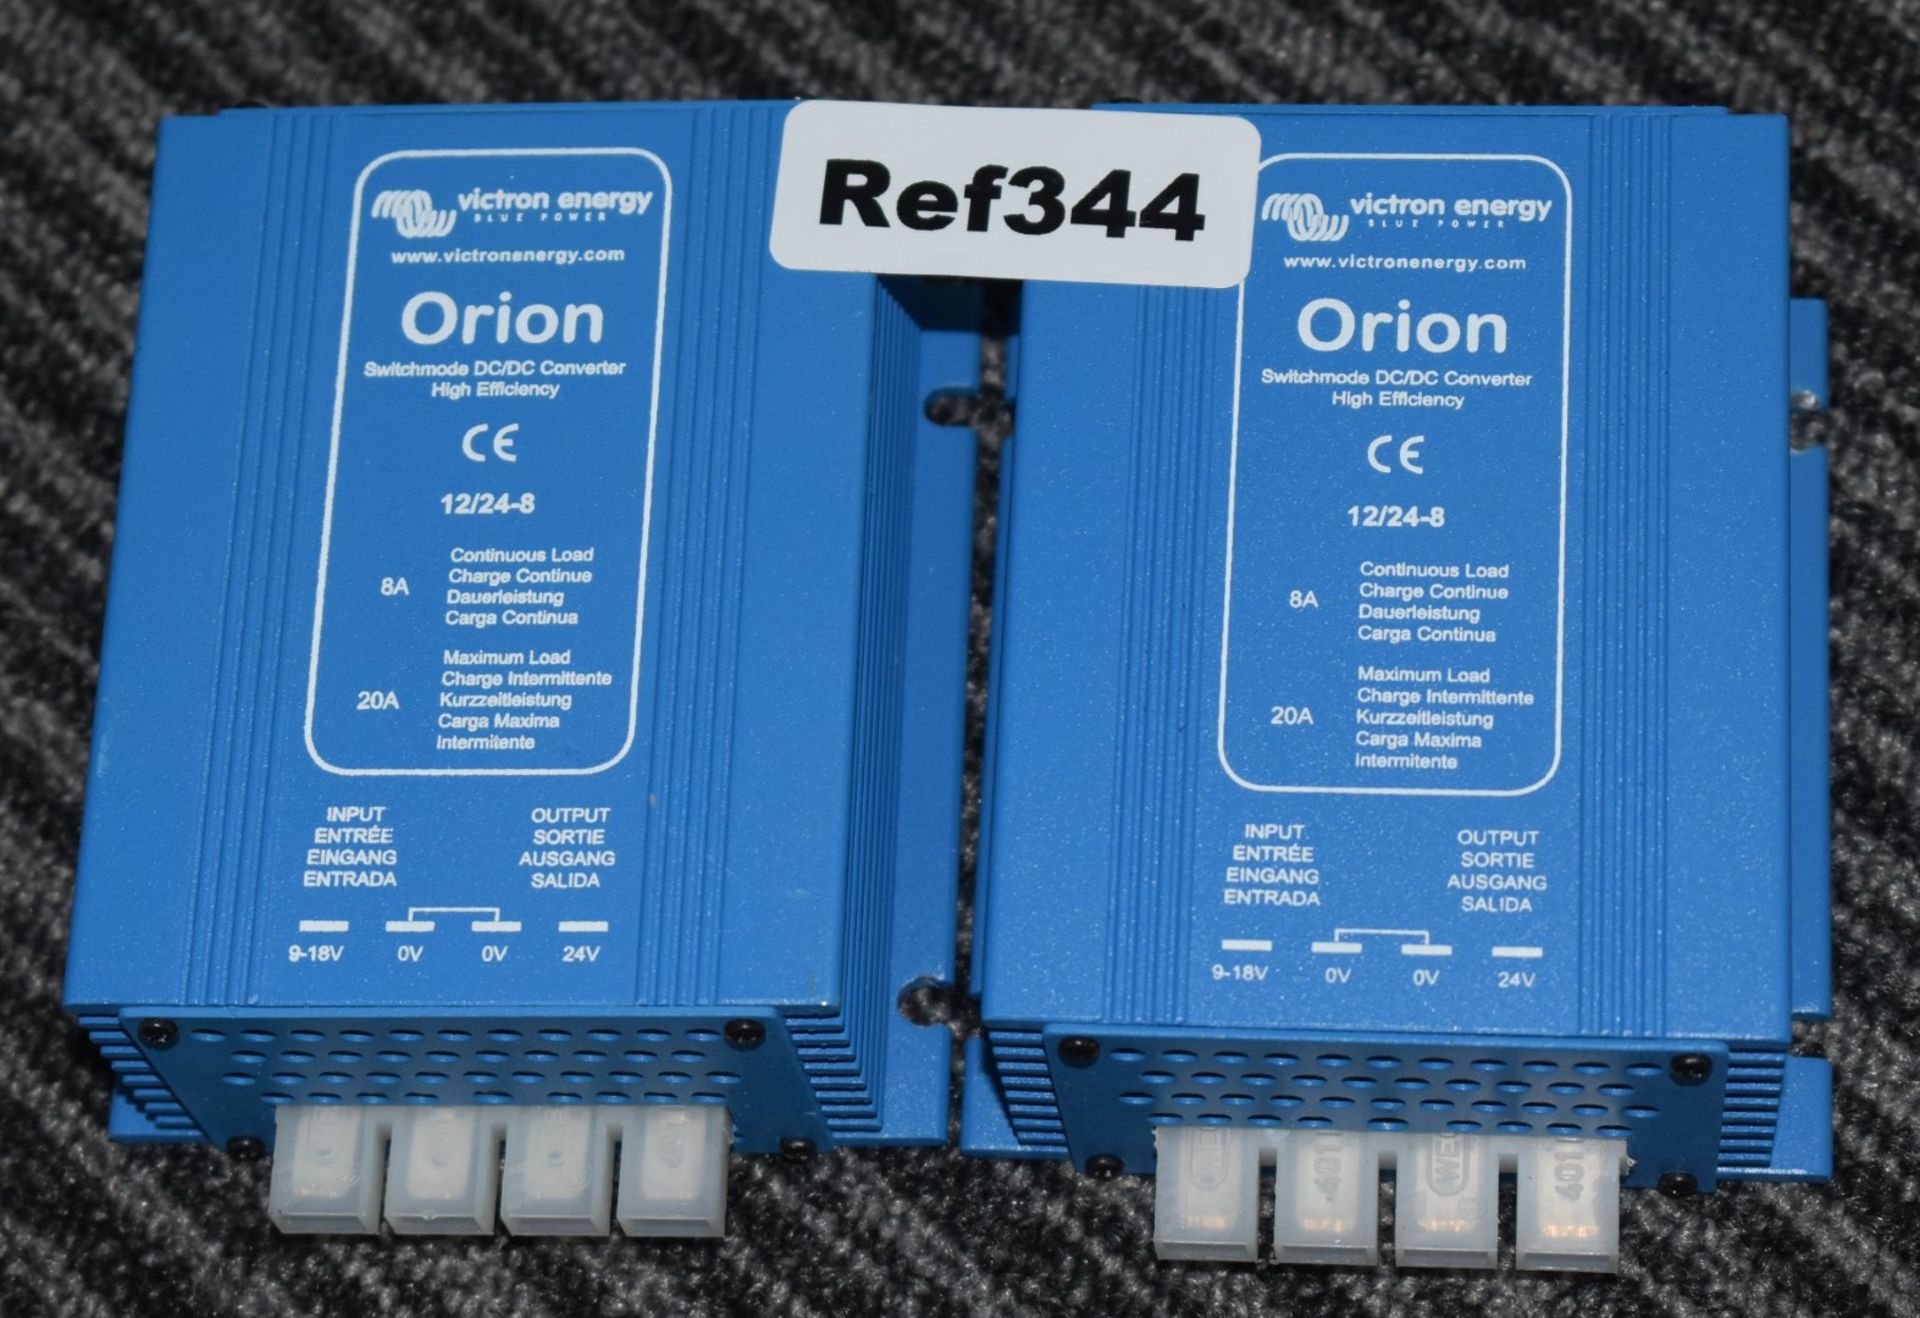 2 x Victron Energy Orion Switchmode DC/DC High Efficiency Condverters 12/24-8 - Model ORI122408020 -